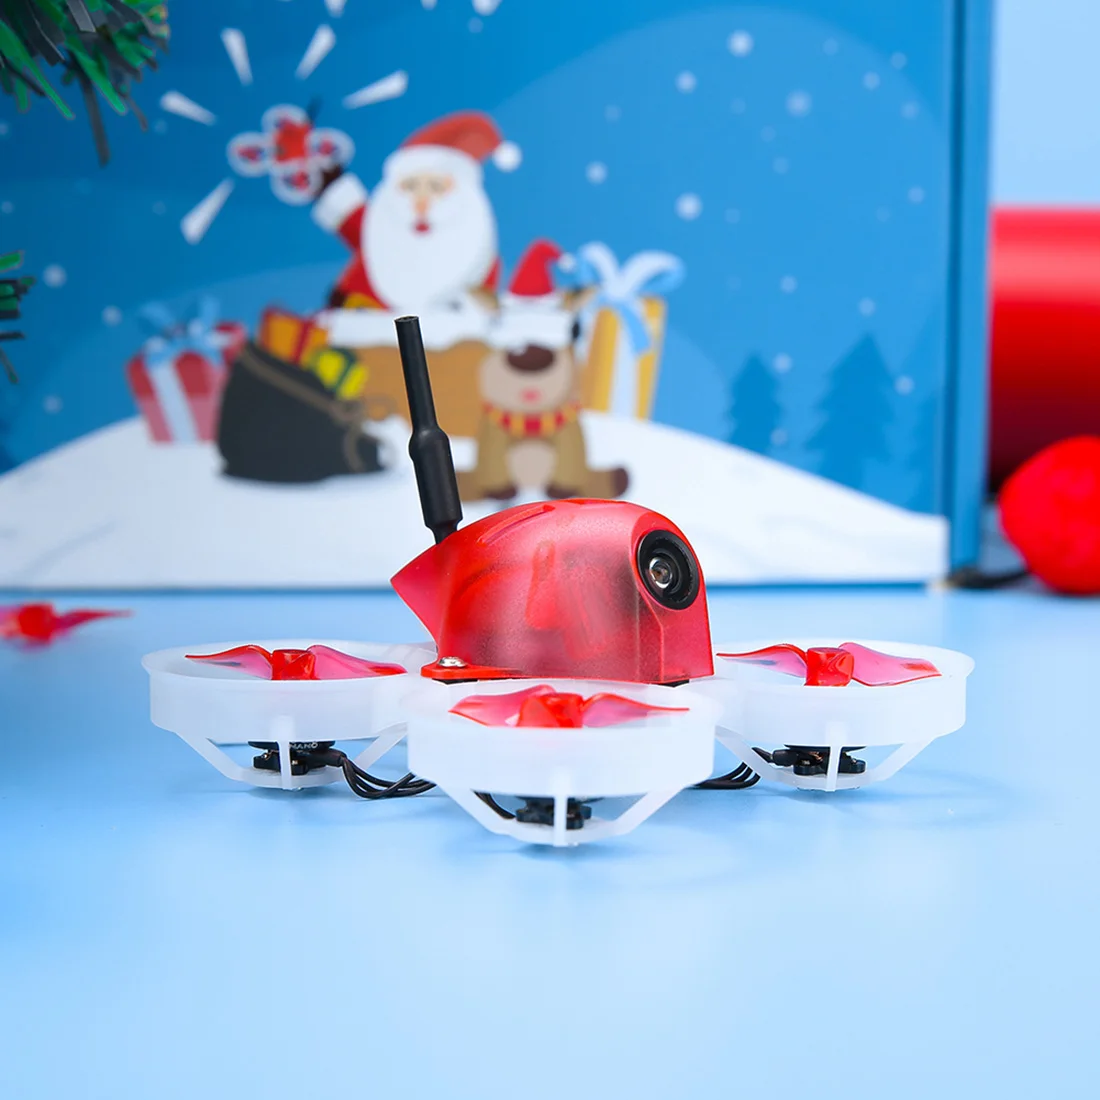 

iFlight Alpha A65 65mm Tiny BWhoop RC Quadcopter PNP BNF with 800TVL 150° FPV Camera for FPV Racing Drone-Christmas Version